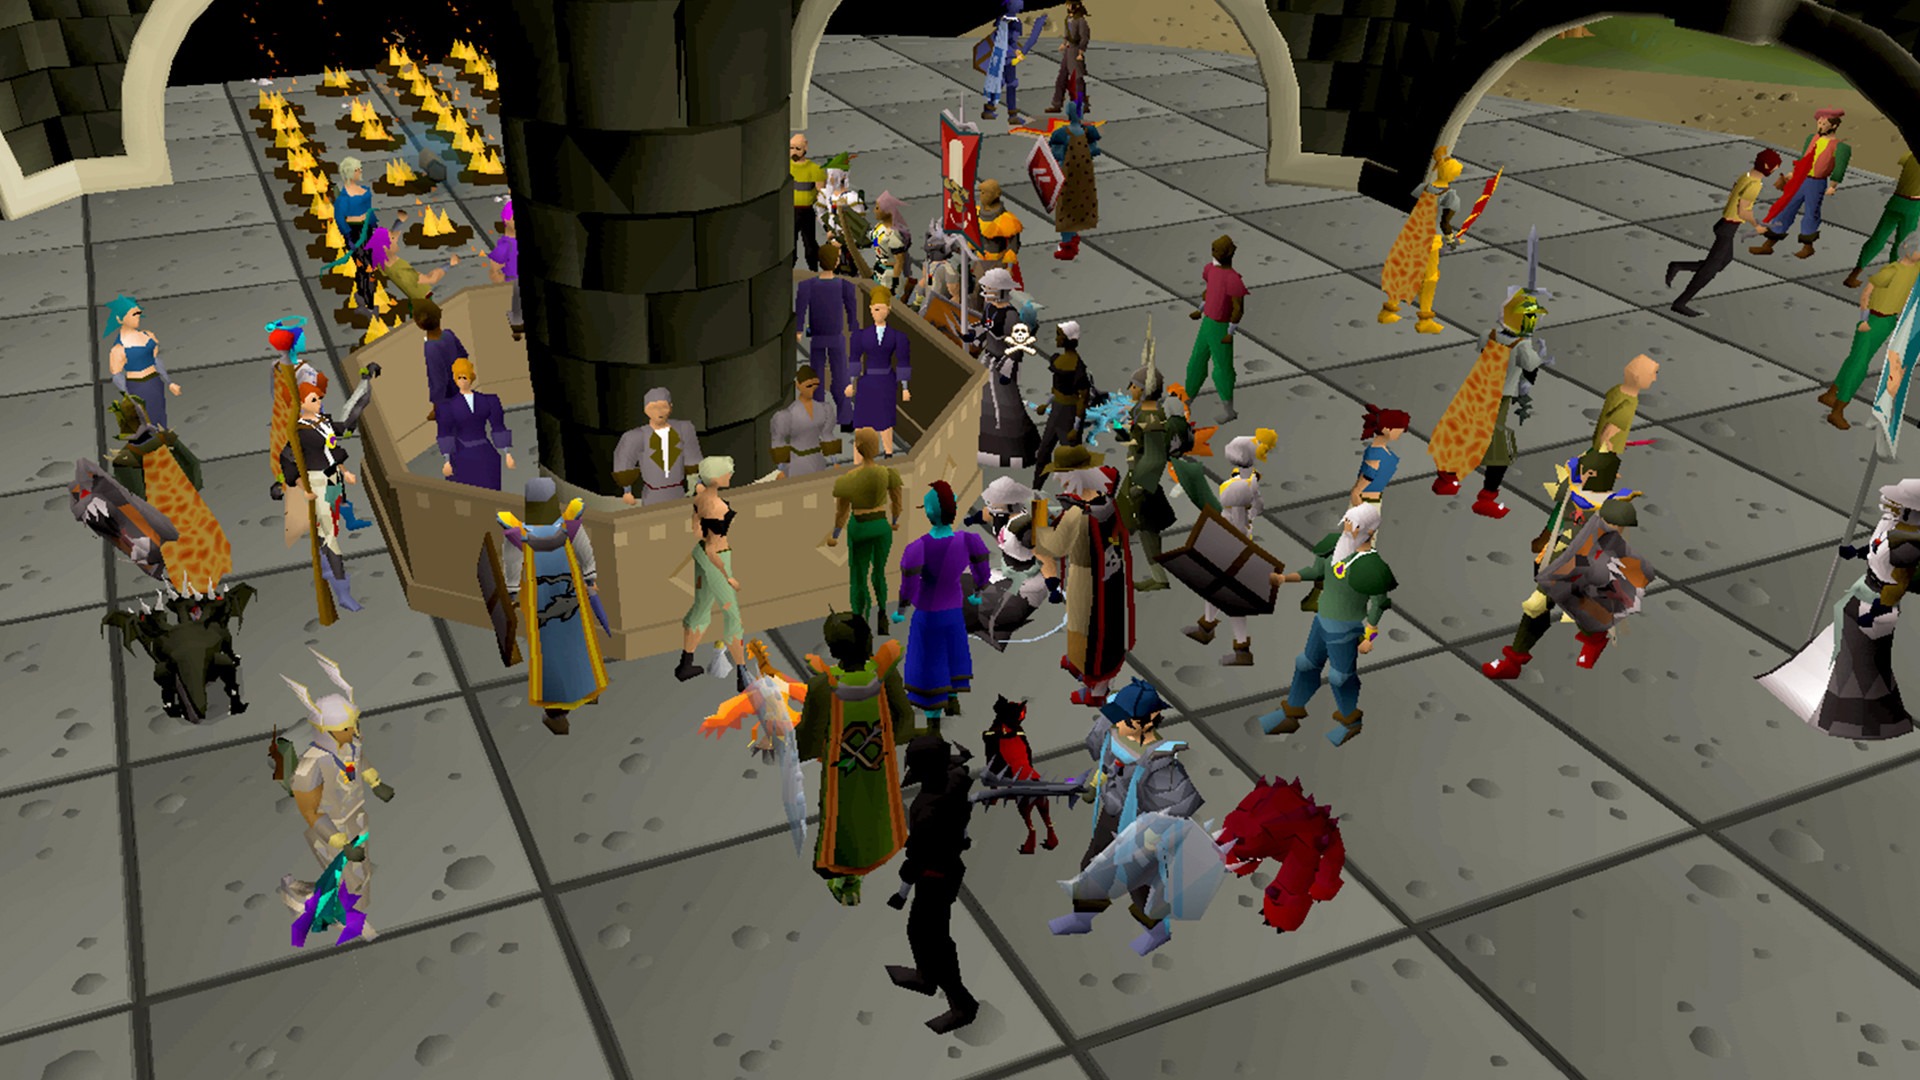 Gather your friends for a Woodcutting party in Old School Runescape